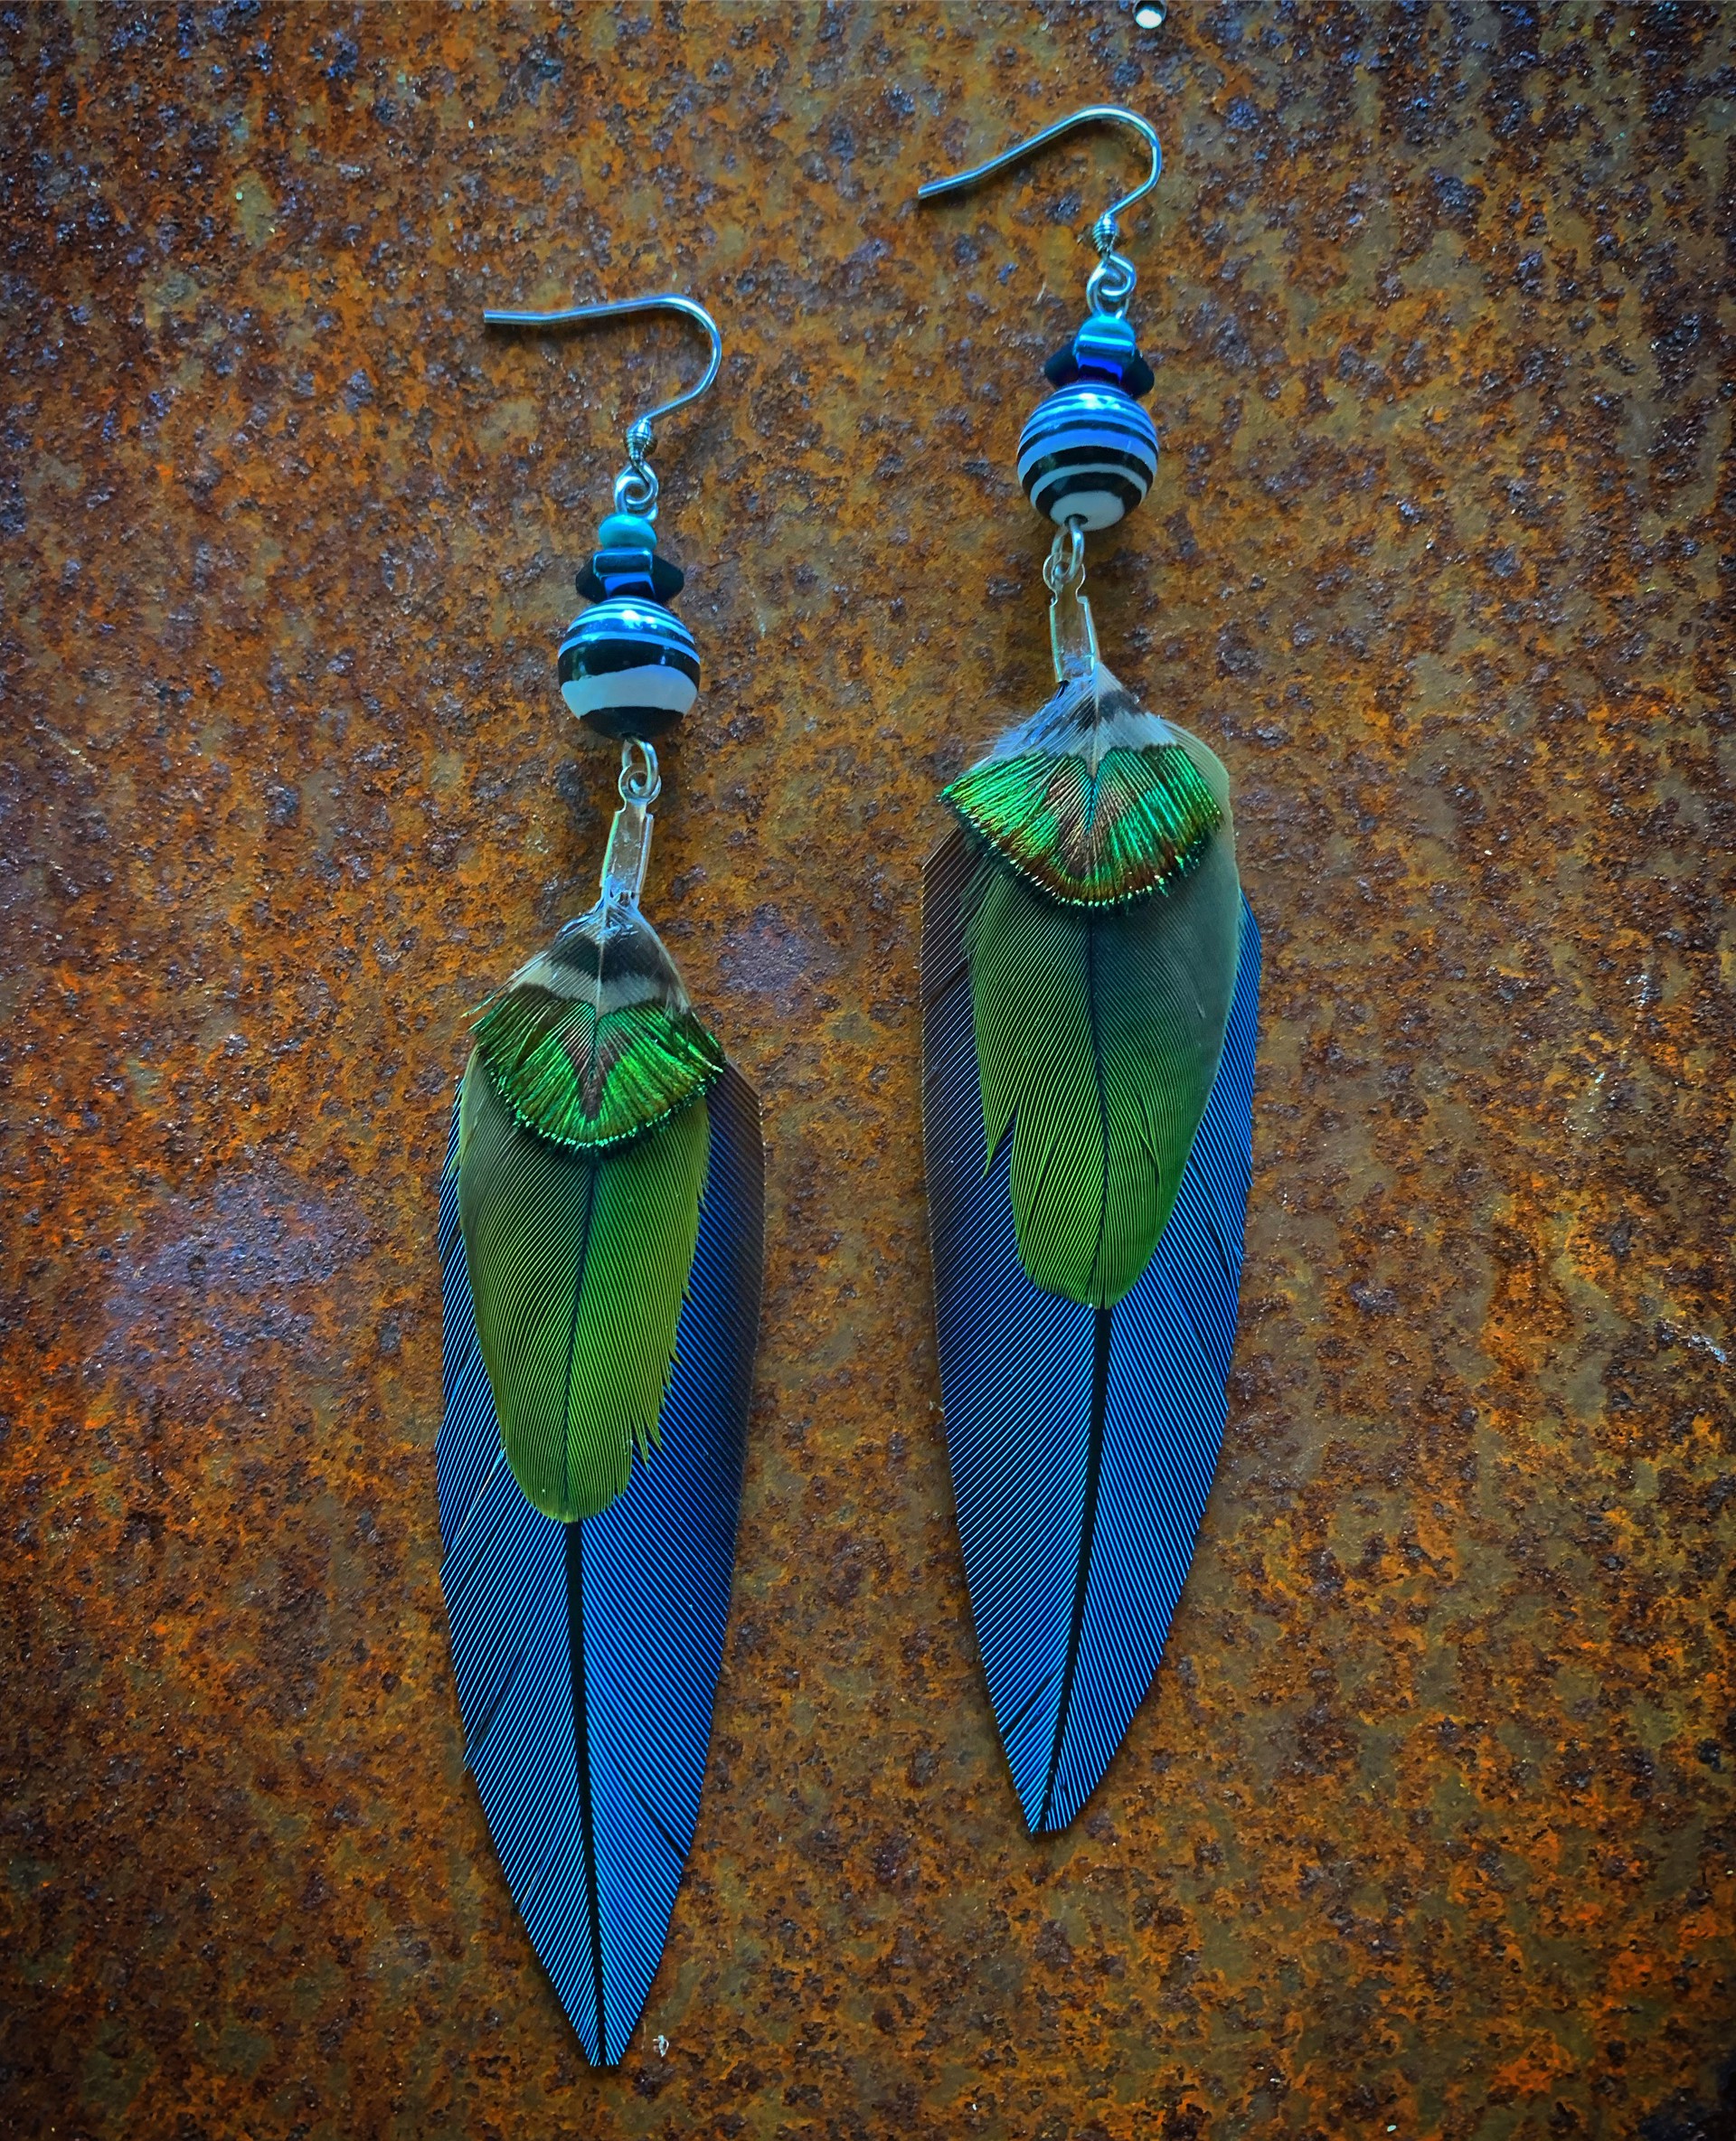 K673 Ethically Sourced Parrot Earrings by Kelly Ormsby